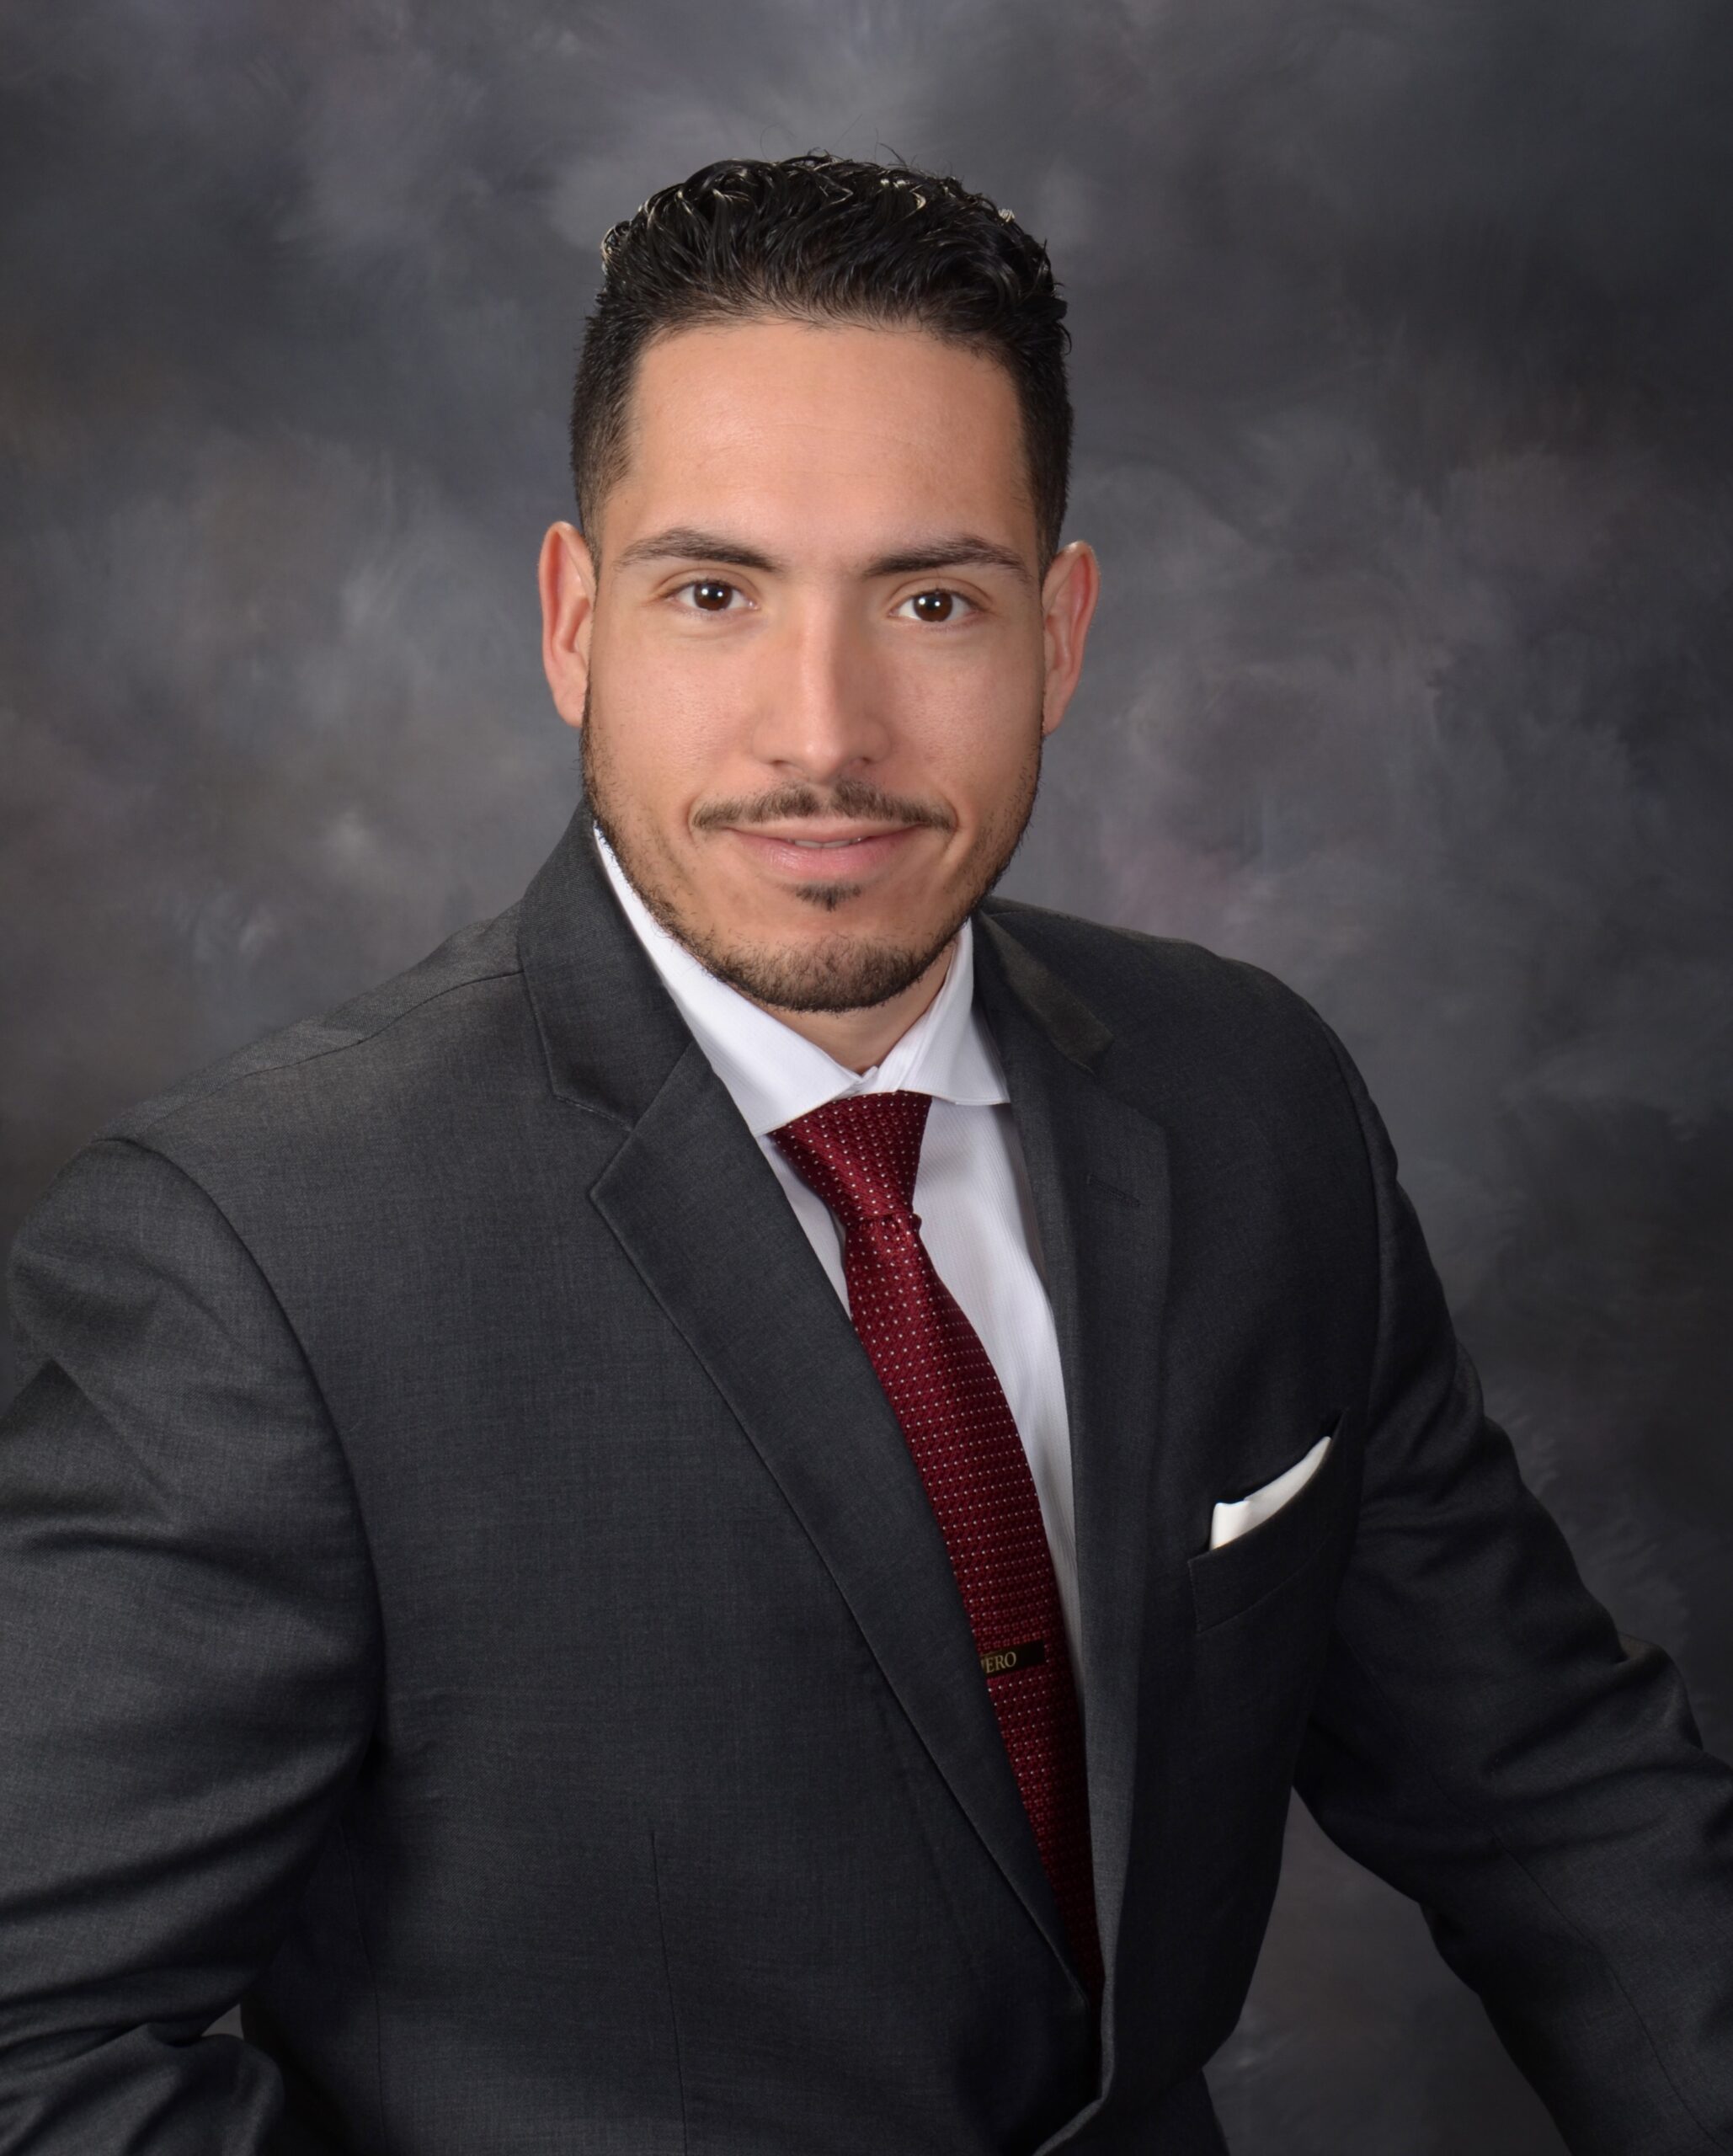 Latino law student wearing suit and tie